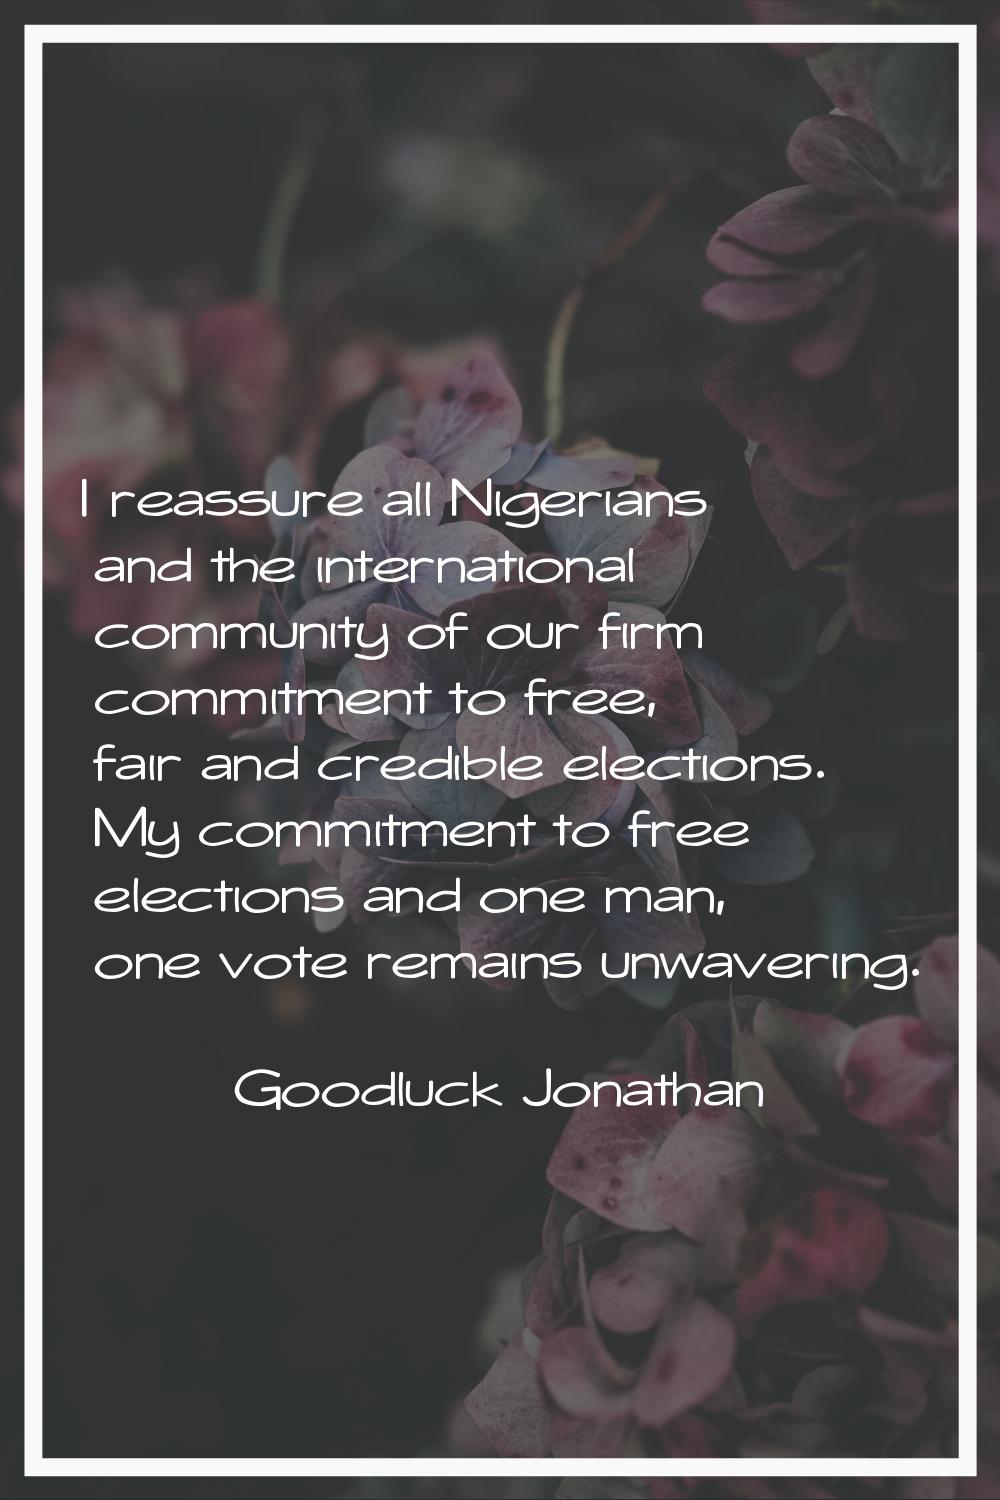 I reassure all Nigerians and the international community of our firm commitment to free, fair and c